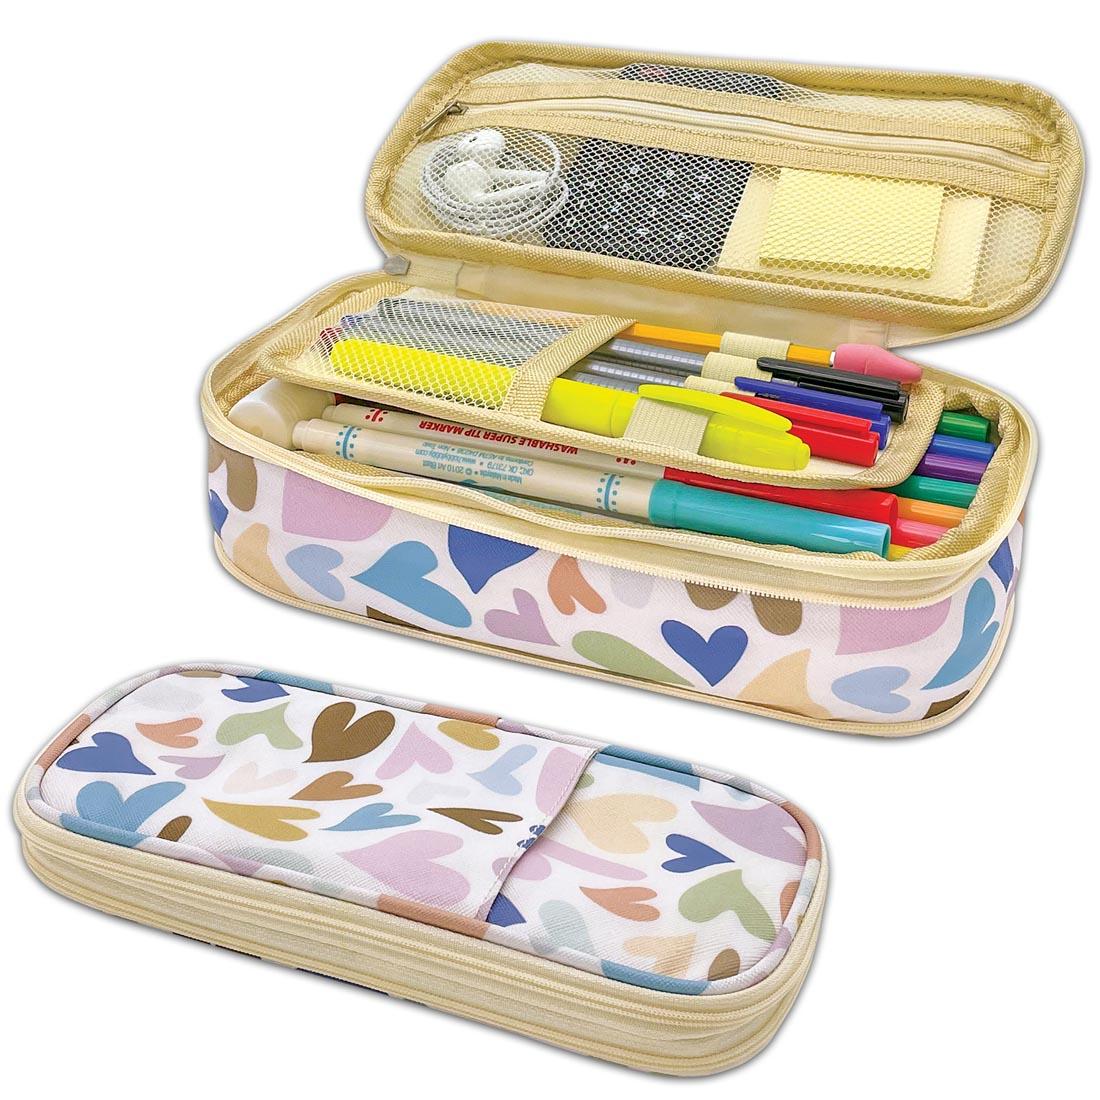 Hearts Pencil Case from the Everyone is Welcome collection shown both closed and open with suggested contents inside